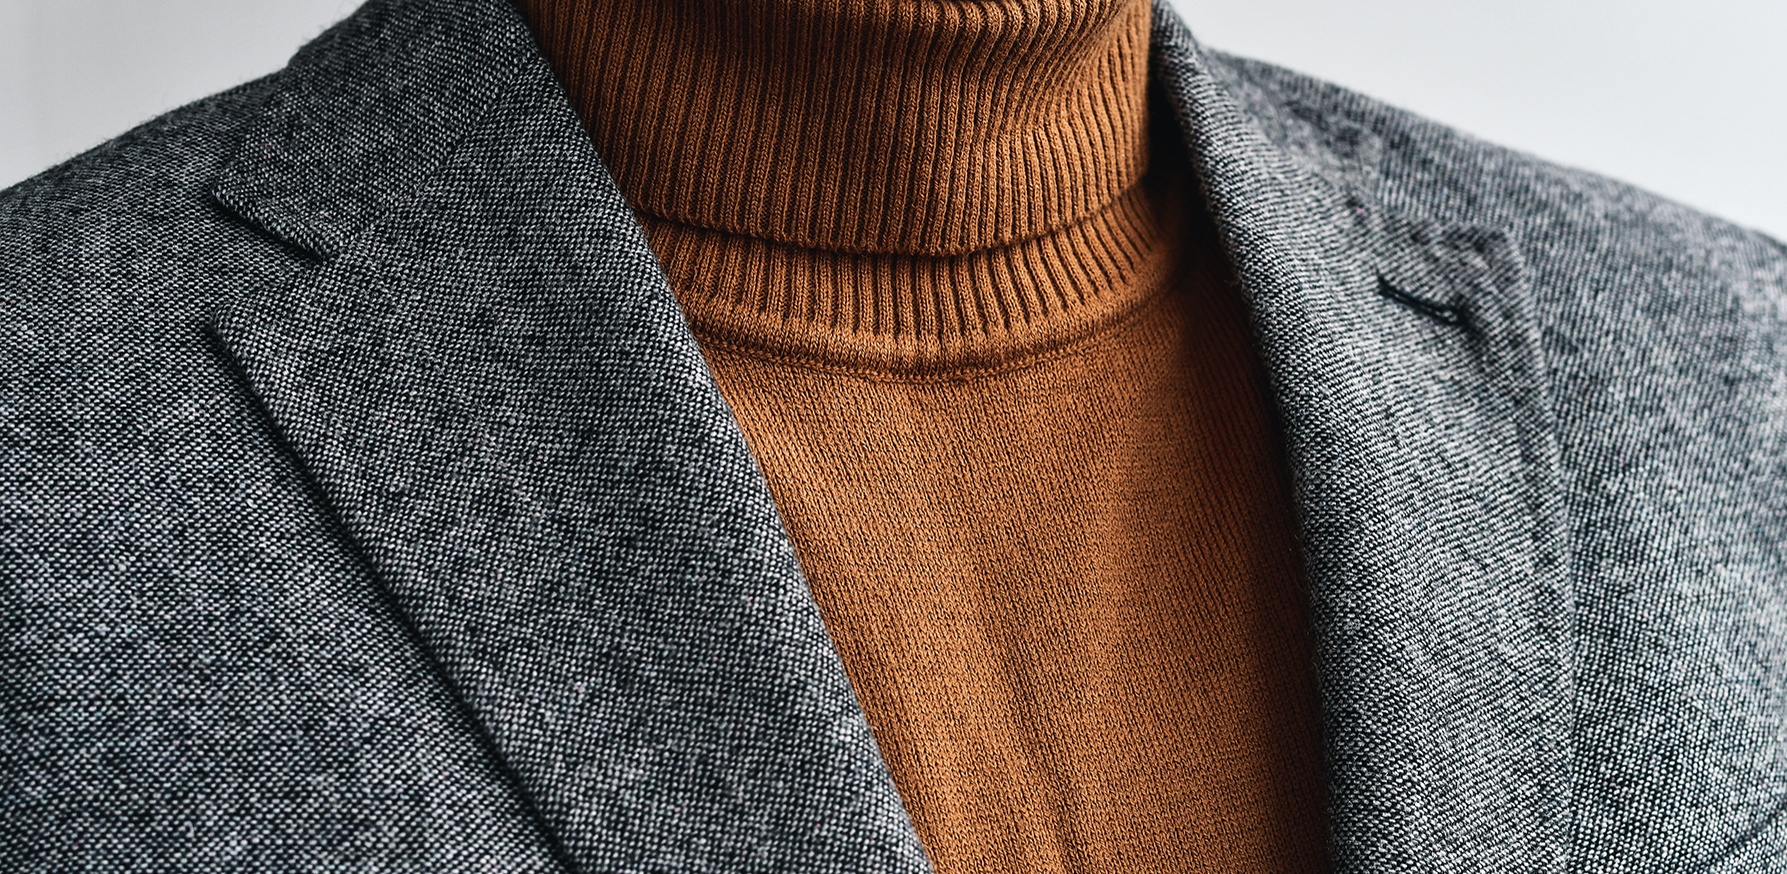 cozy-trends-to-warm-up-close-up-on-turtle-neck-and-blazer